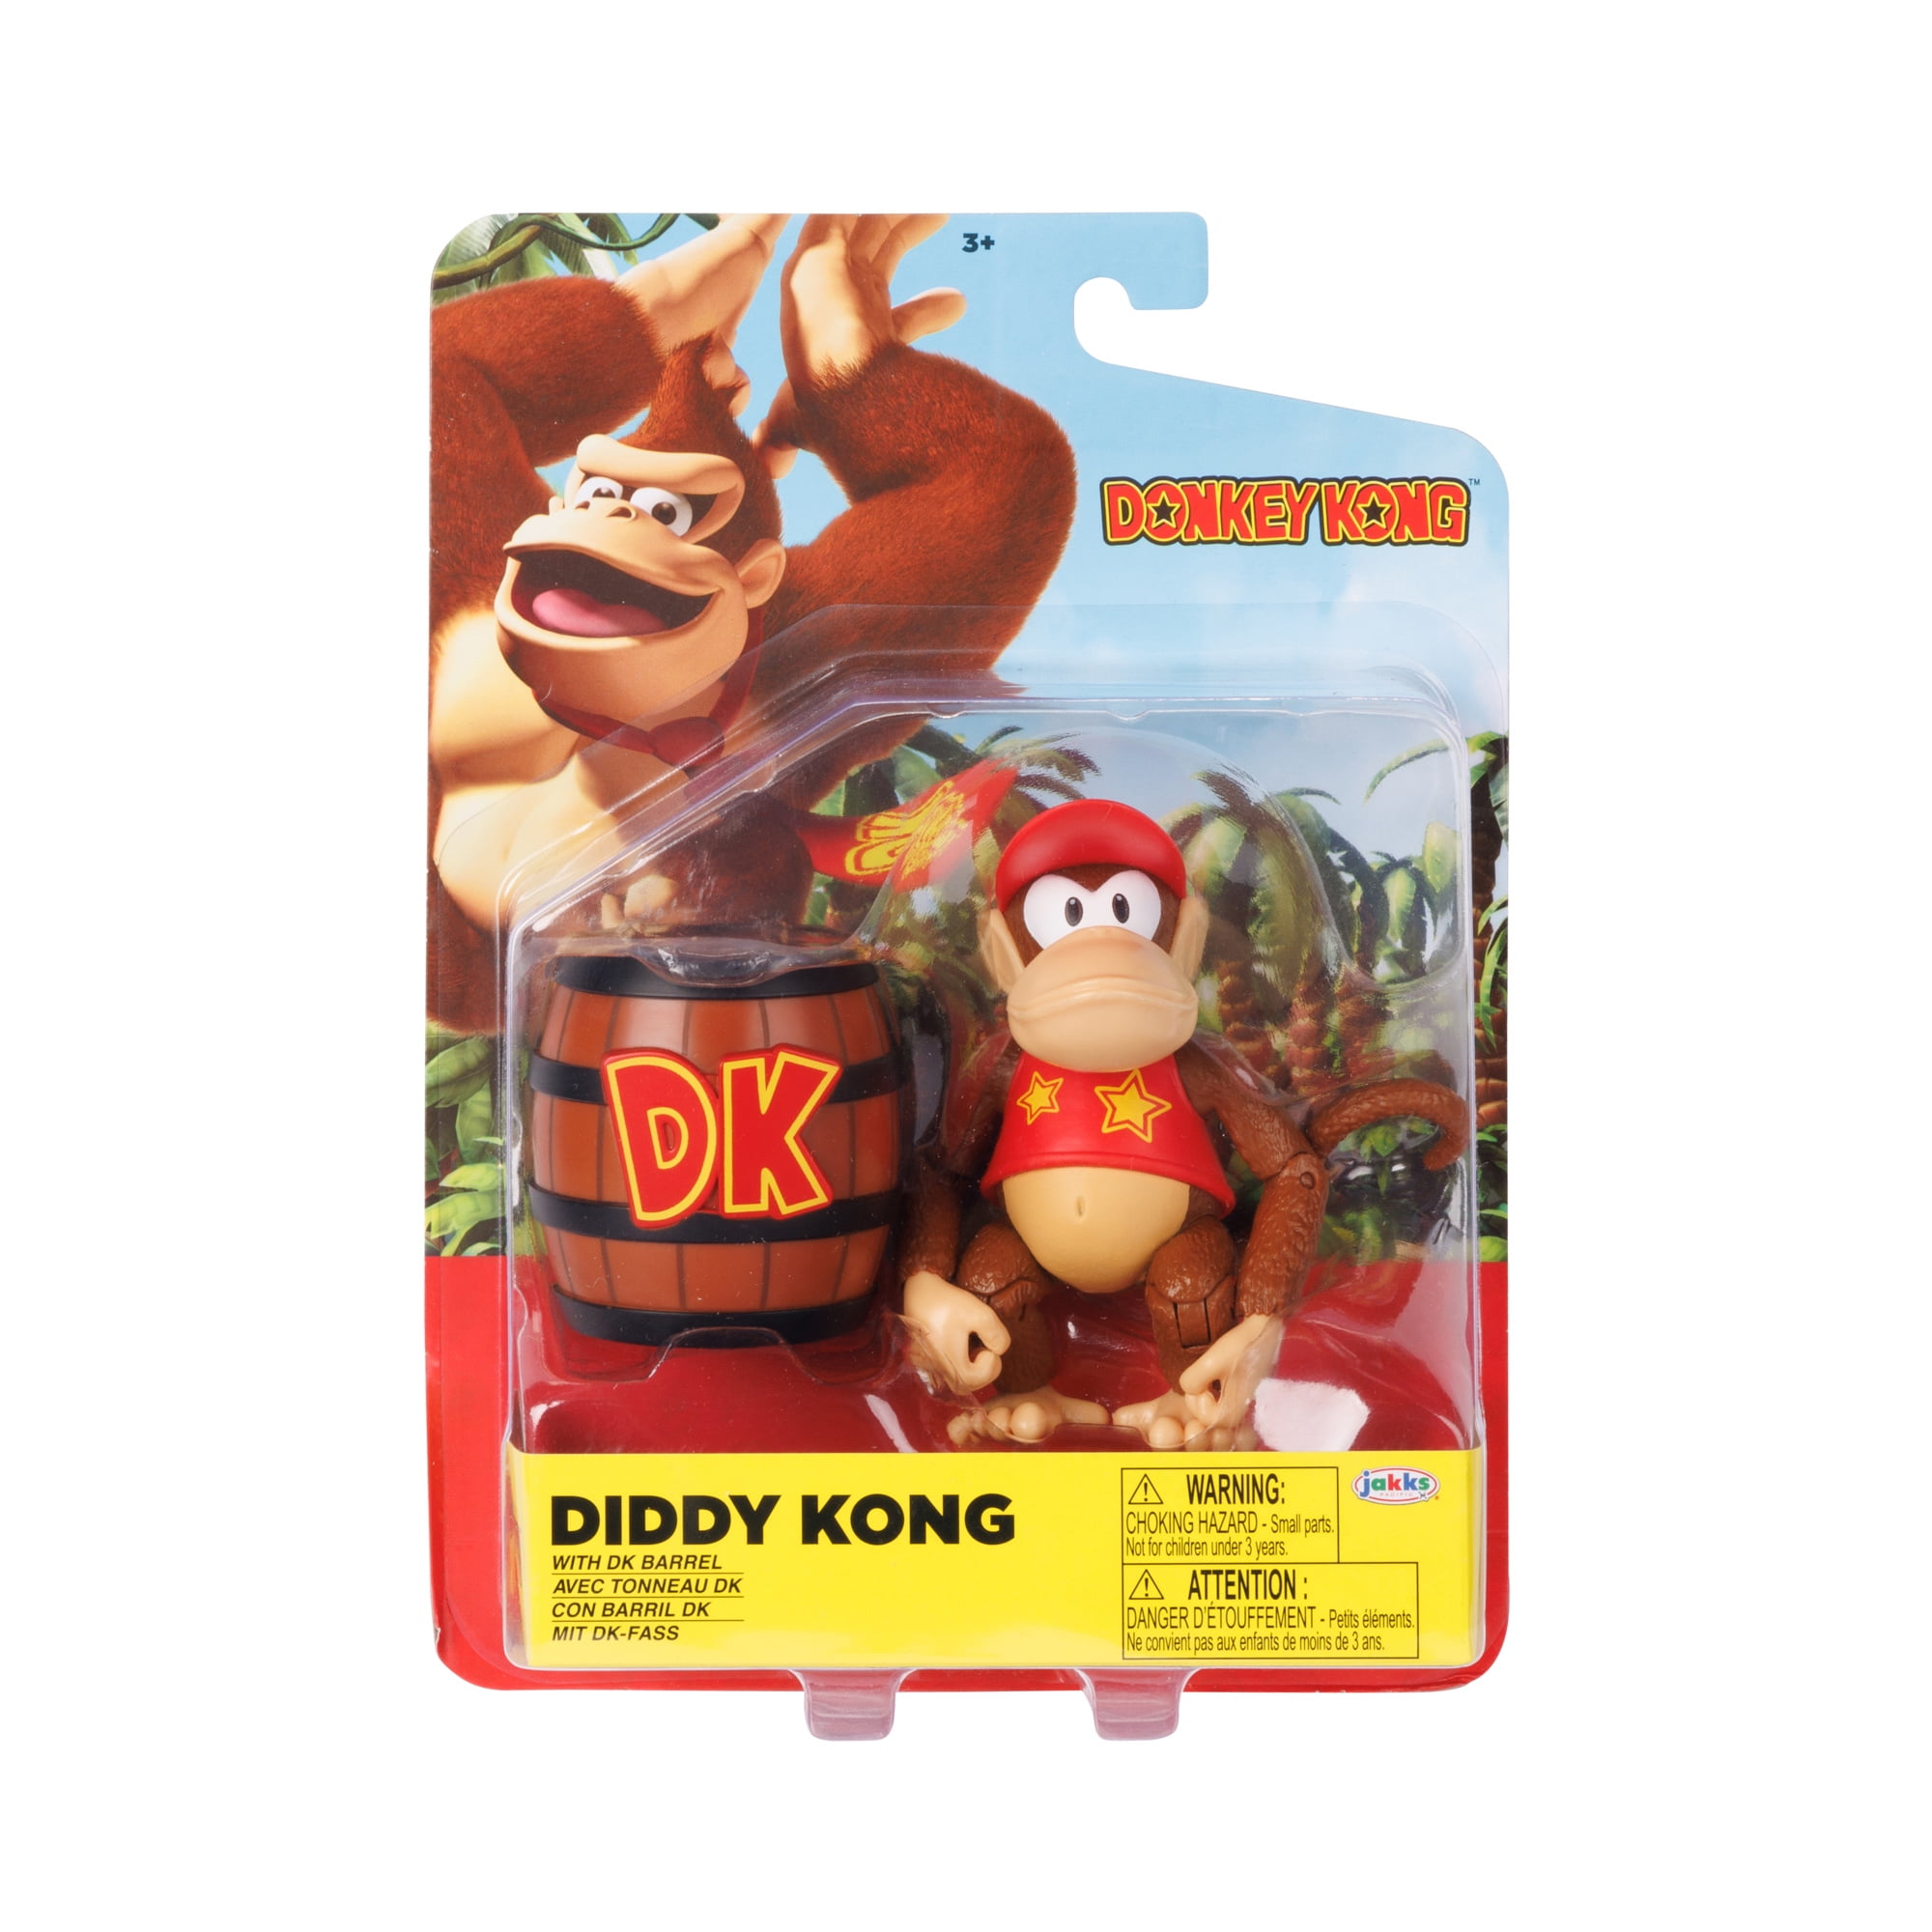 4'' Nintendo's Donkey Kong Franchise: Diddy Kong Action Figure w/ Barrel Accessory  $7.44  + Free S&H w/ Walmart+ or $35+